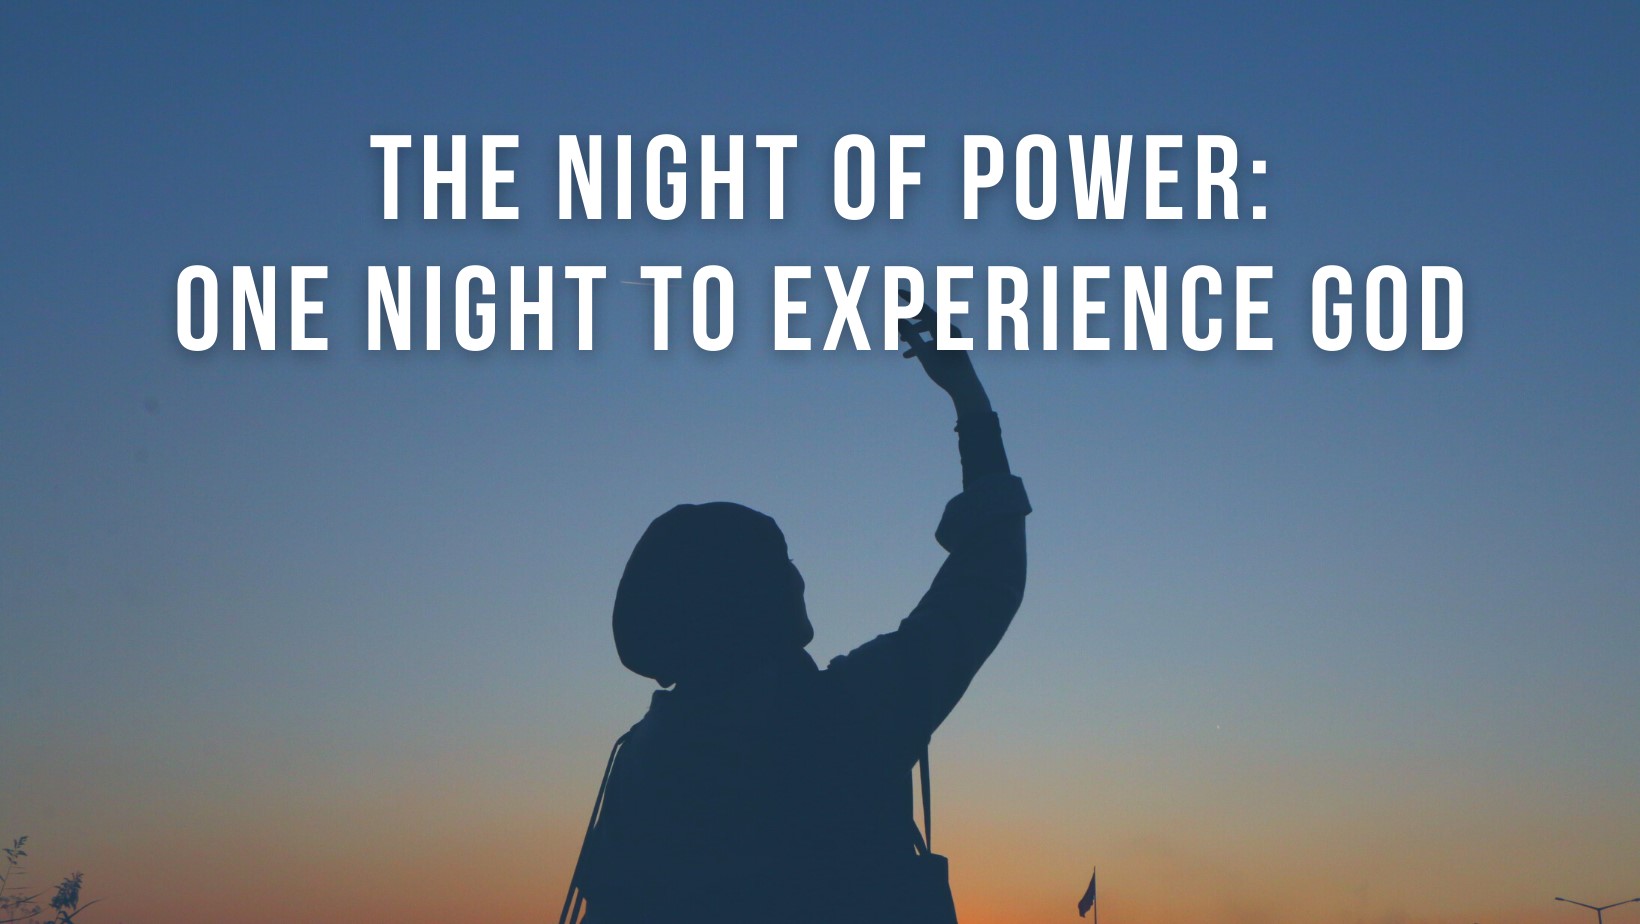 The Night of Power: One night to experience God